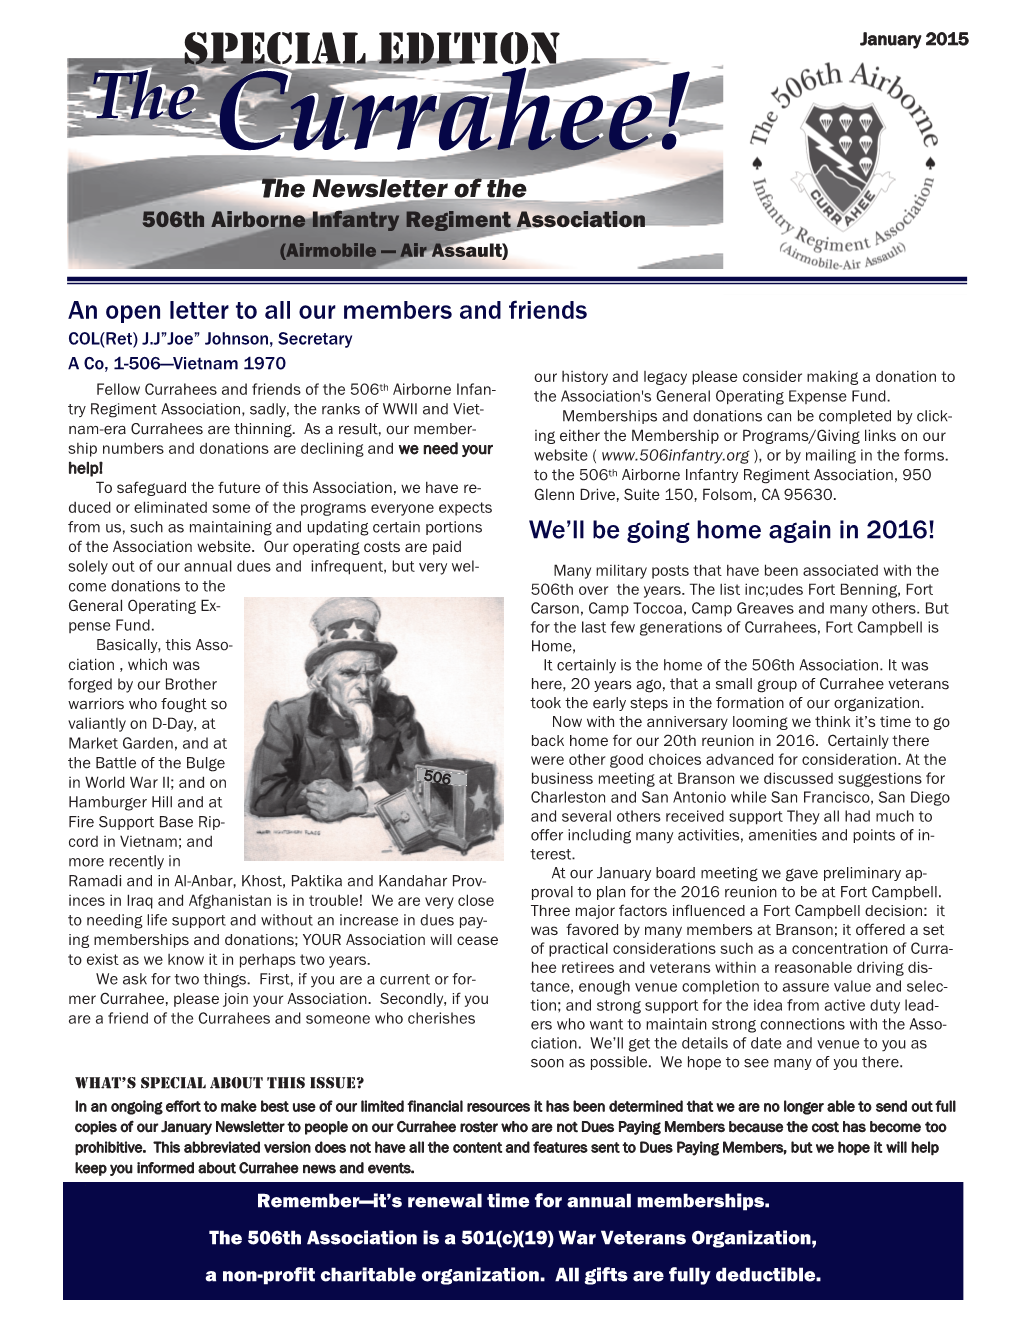 The Currahee!Currahee! the Newsletter of the 506Th Airborne Infantry Regiment Association (Airmobile — Air Assault)